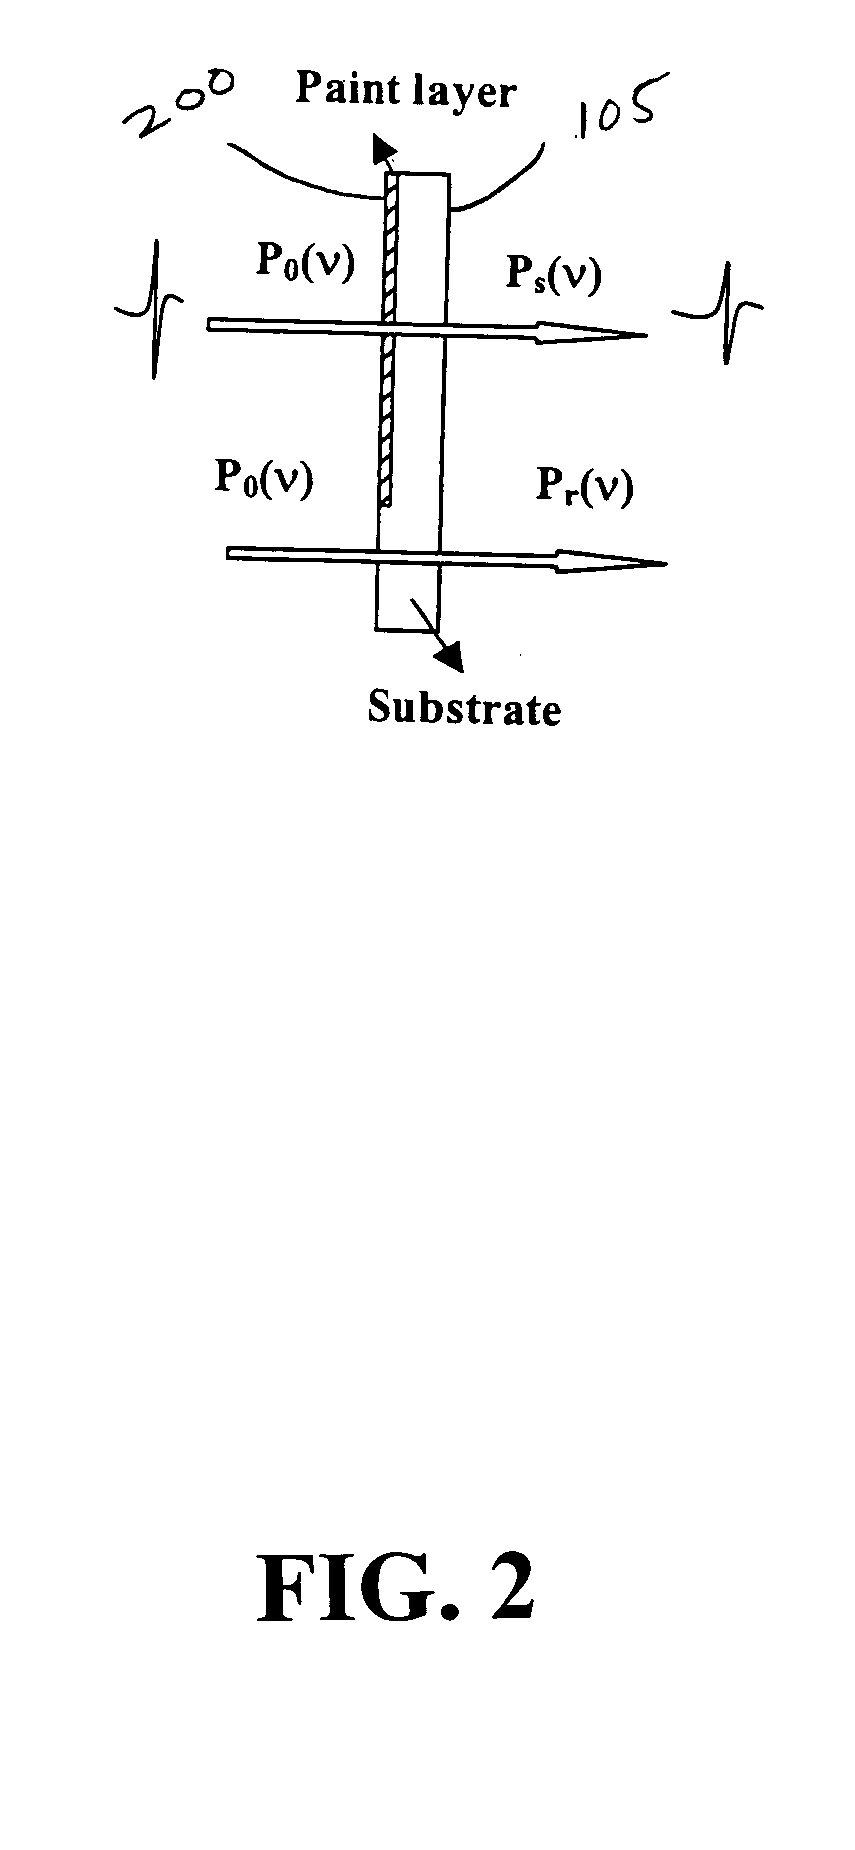 Systems and methods for non-destructively detecting material abnormalities beneath a coated surface